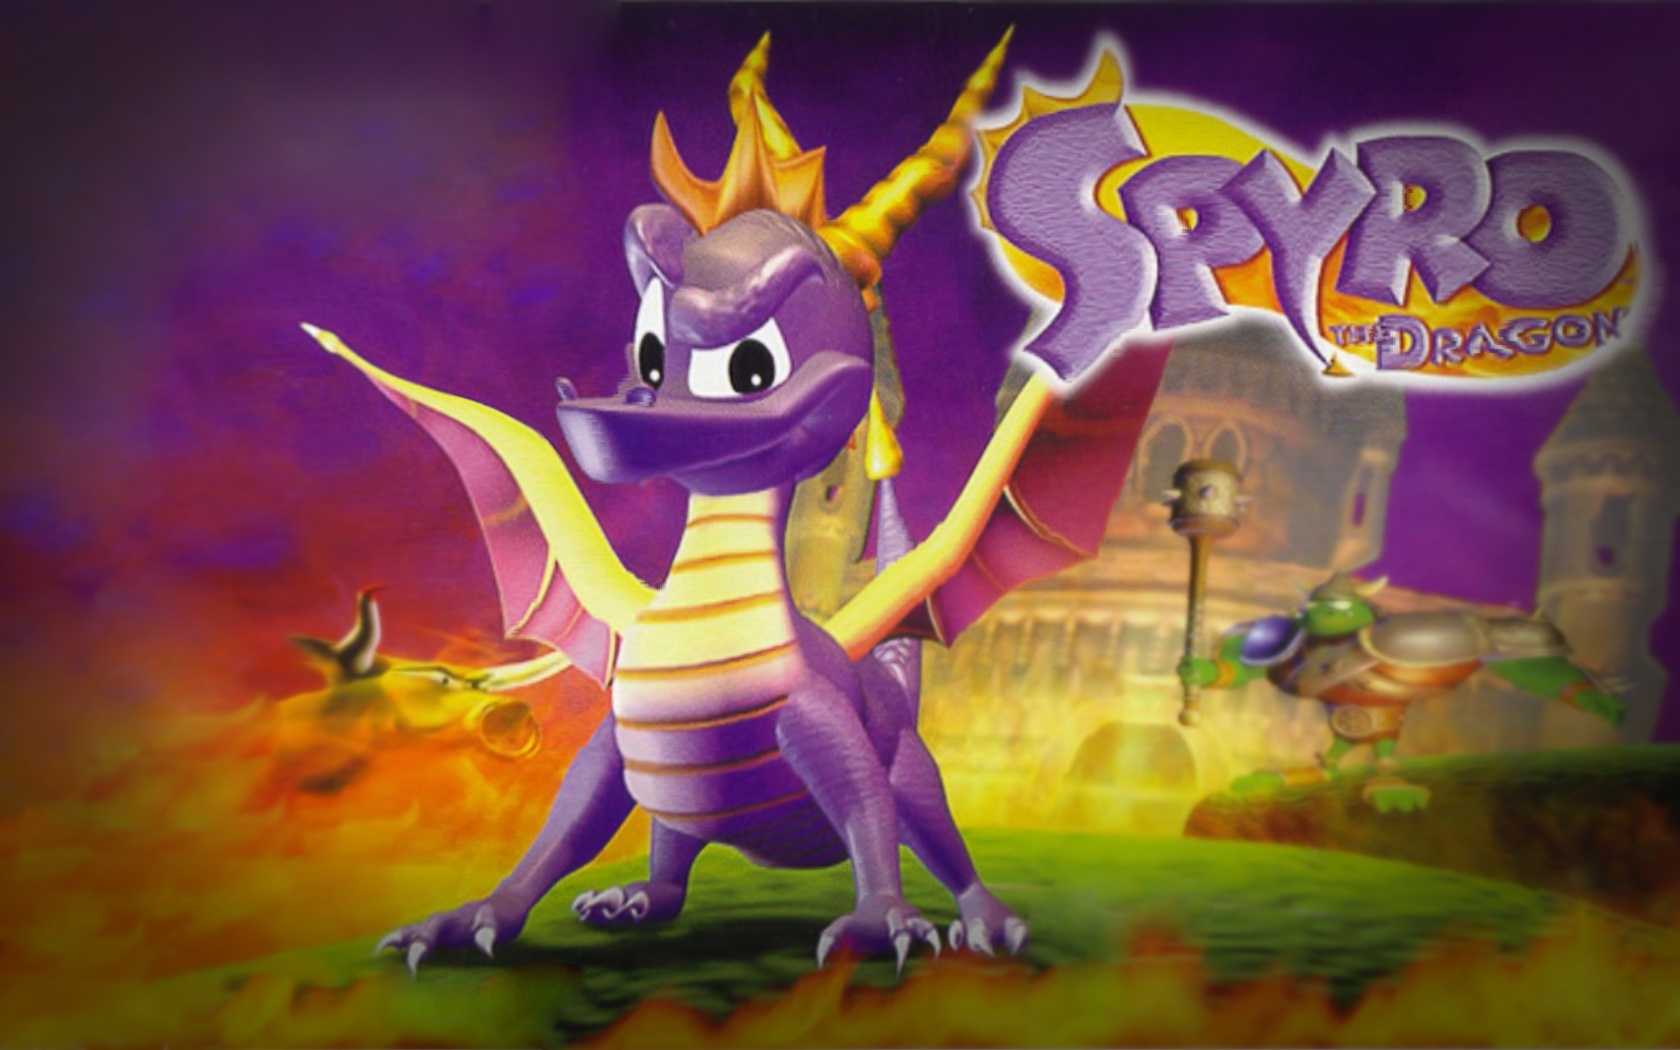 Nice Images Collection: Spyro The Dragon Desktop Wallpapers